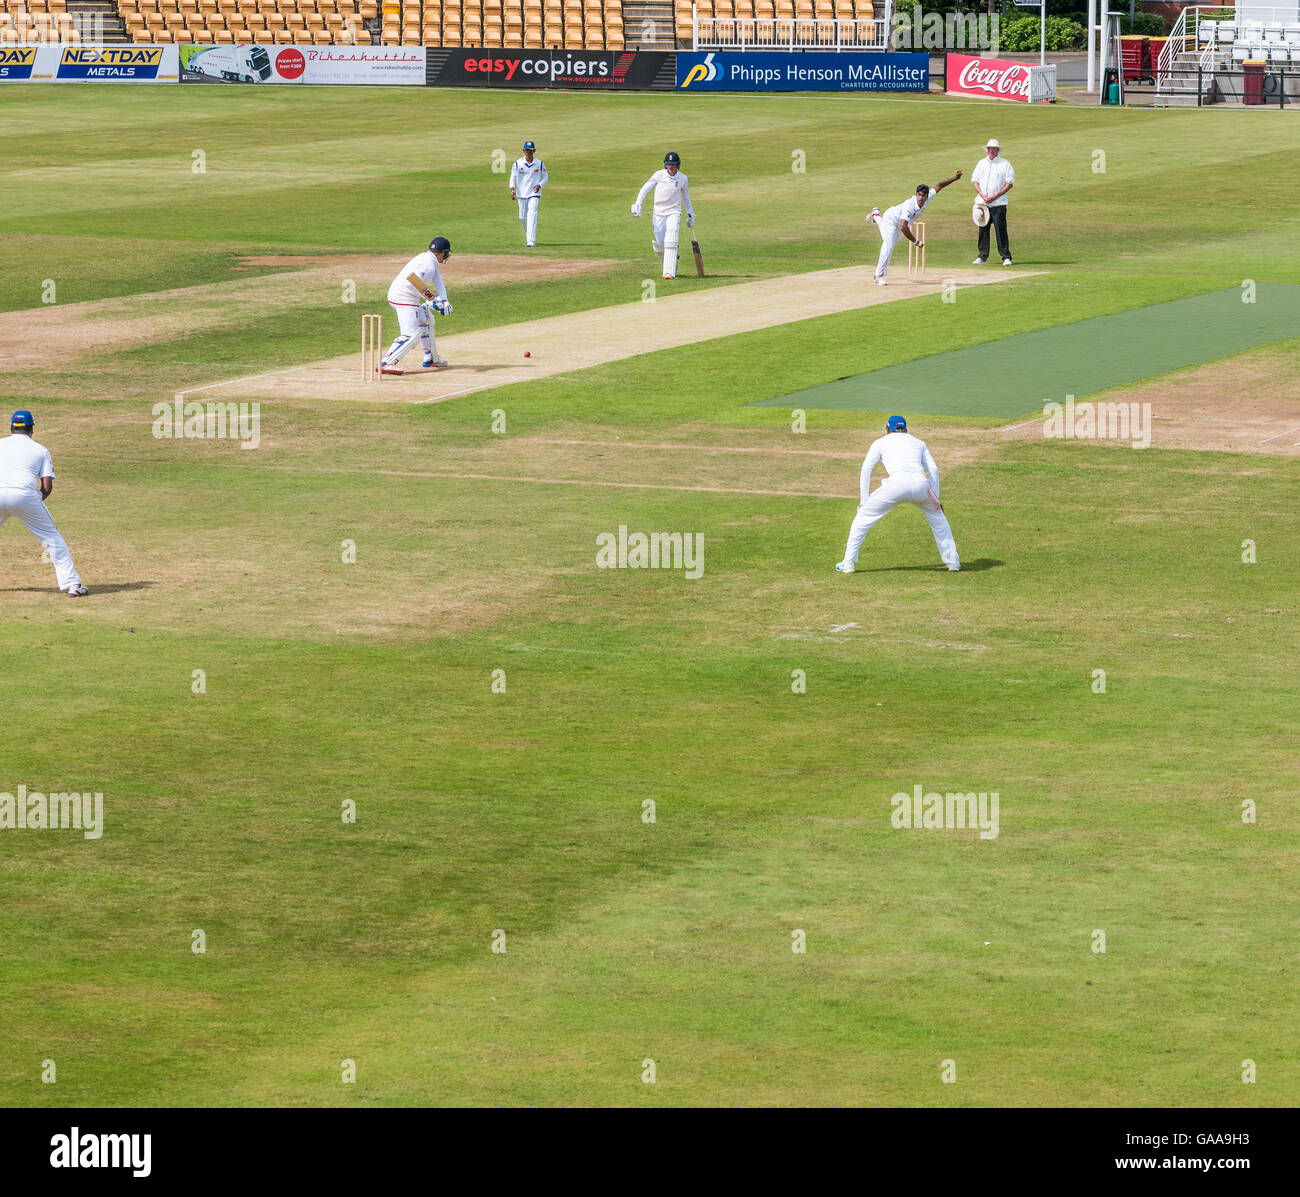 Northampton, UK. 05th Aug, 2016. The Sri Lanka bowler, Kumara, in action on the fourth day of the international U19 cricket match between England and Sri Lanka  at the County Ground, Northampton on 5 august 2016; Sri Lanka won by seven wickets and Kumara took eleven wickets (seven in the first innings and four in the second innings). Credit:  miscellany/Alamy Live News Stock Photo